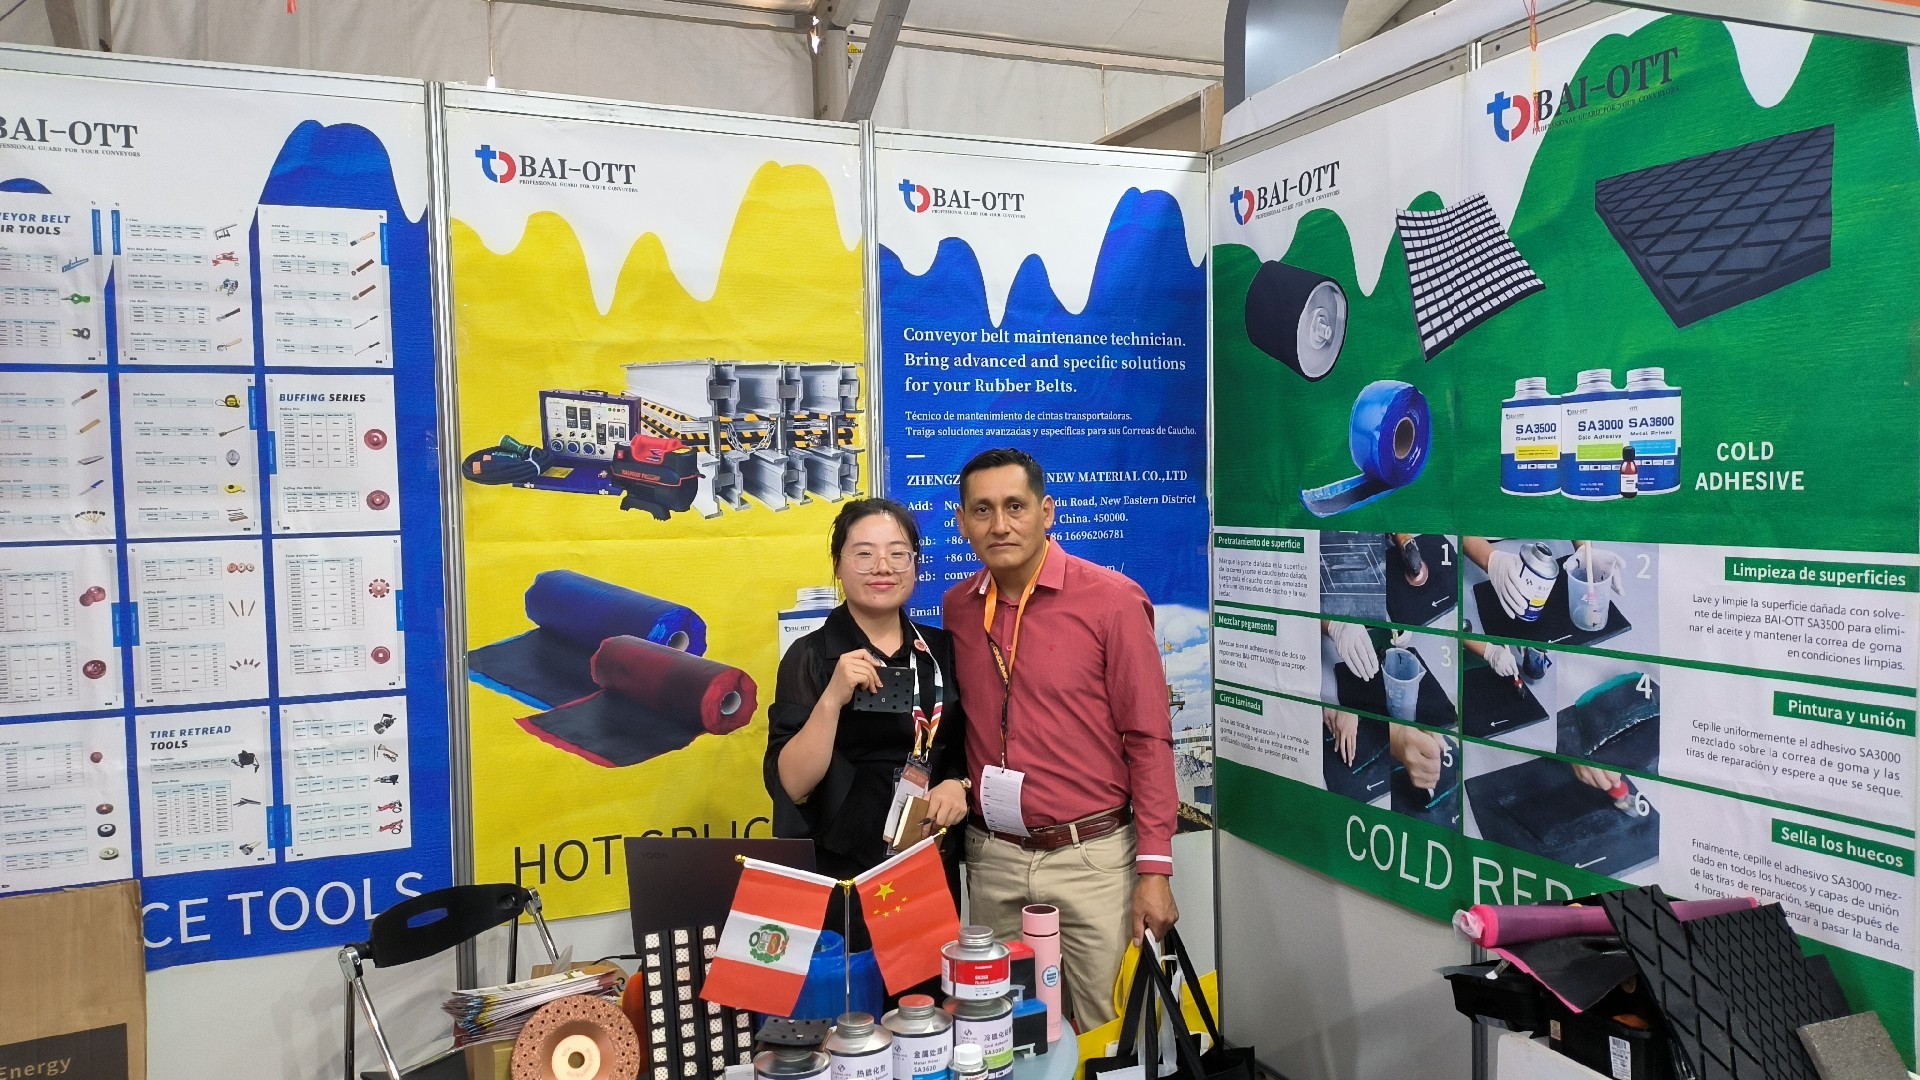 The Peruvian Mining Exhibition is over, cold vulcanized glue and hot vulcanized glue are the focus!Conveyor splicing